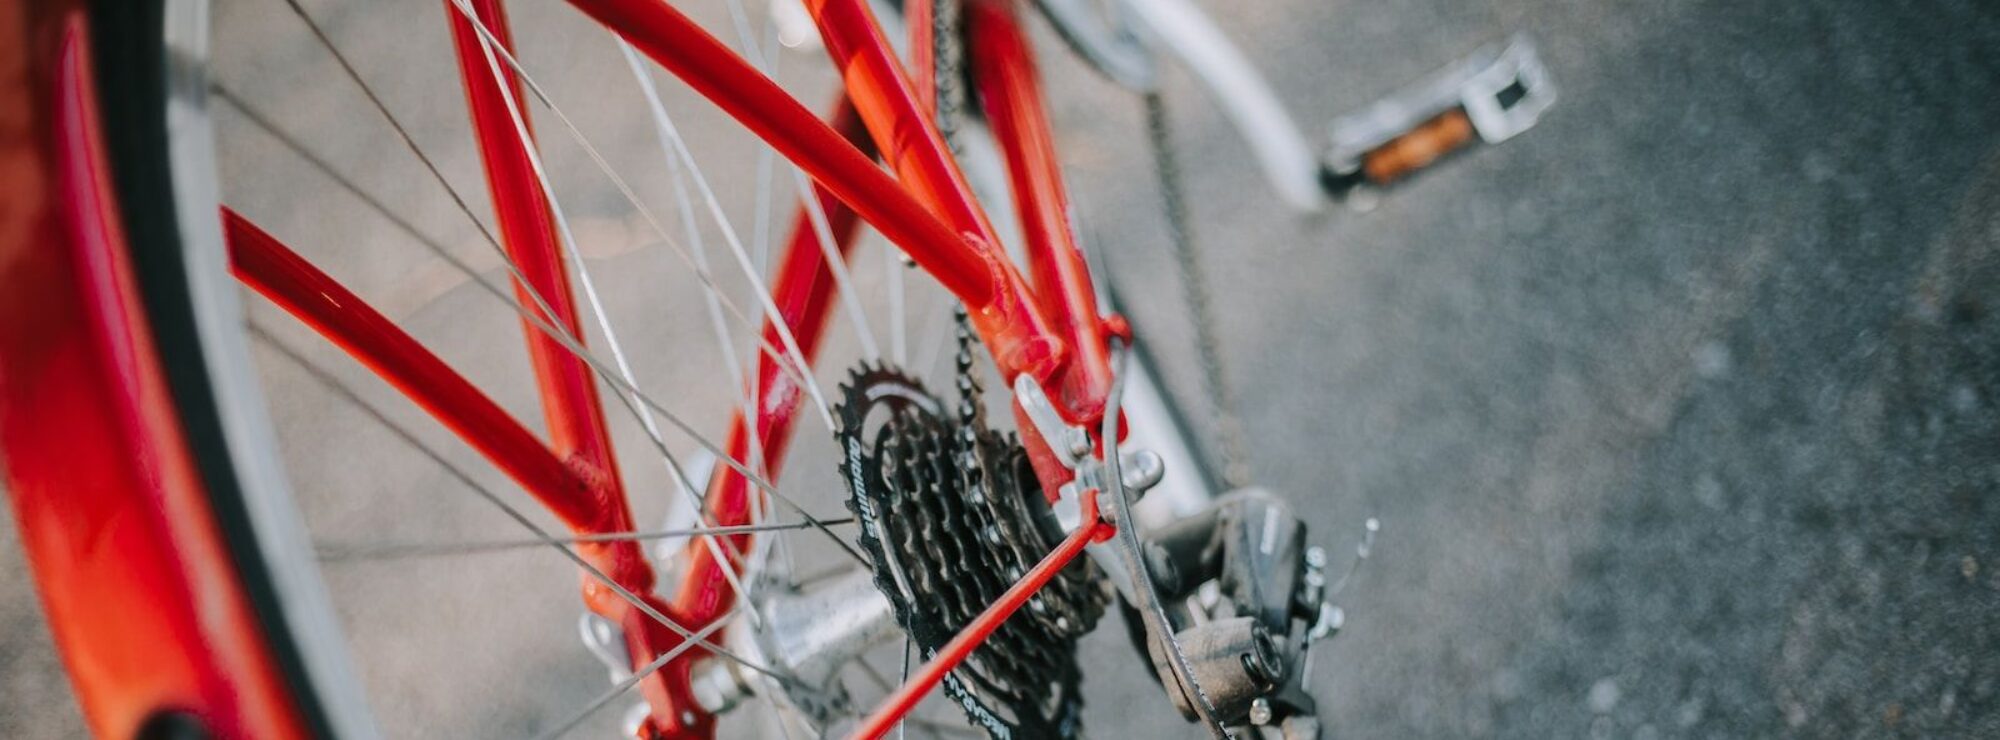 selective focus photography of red and gray bicycle